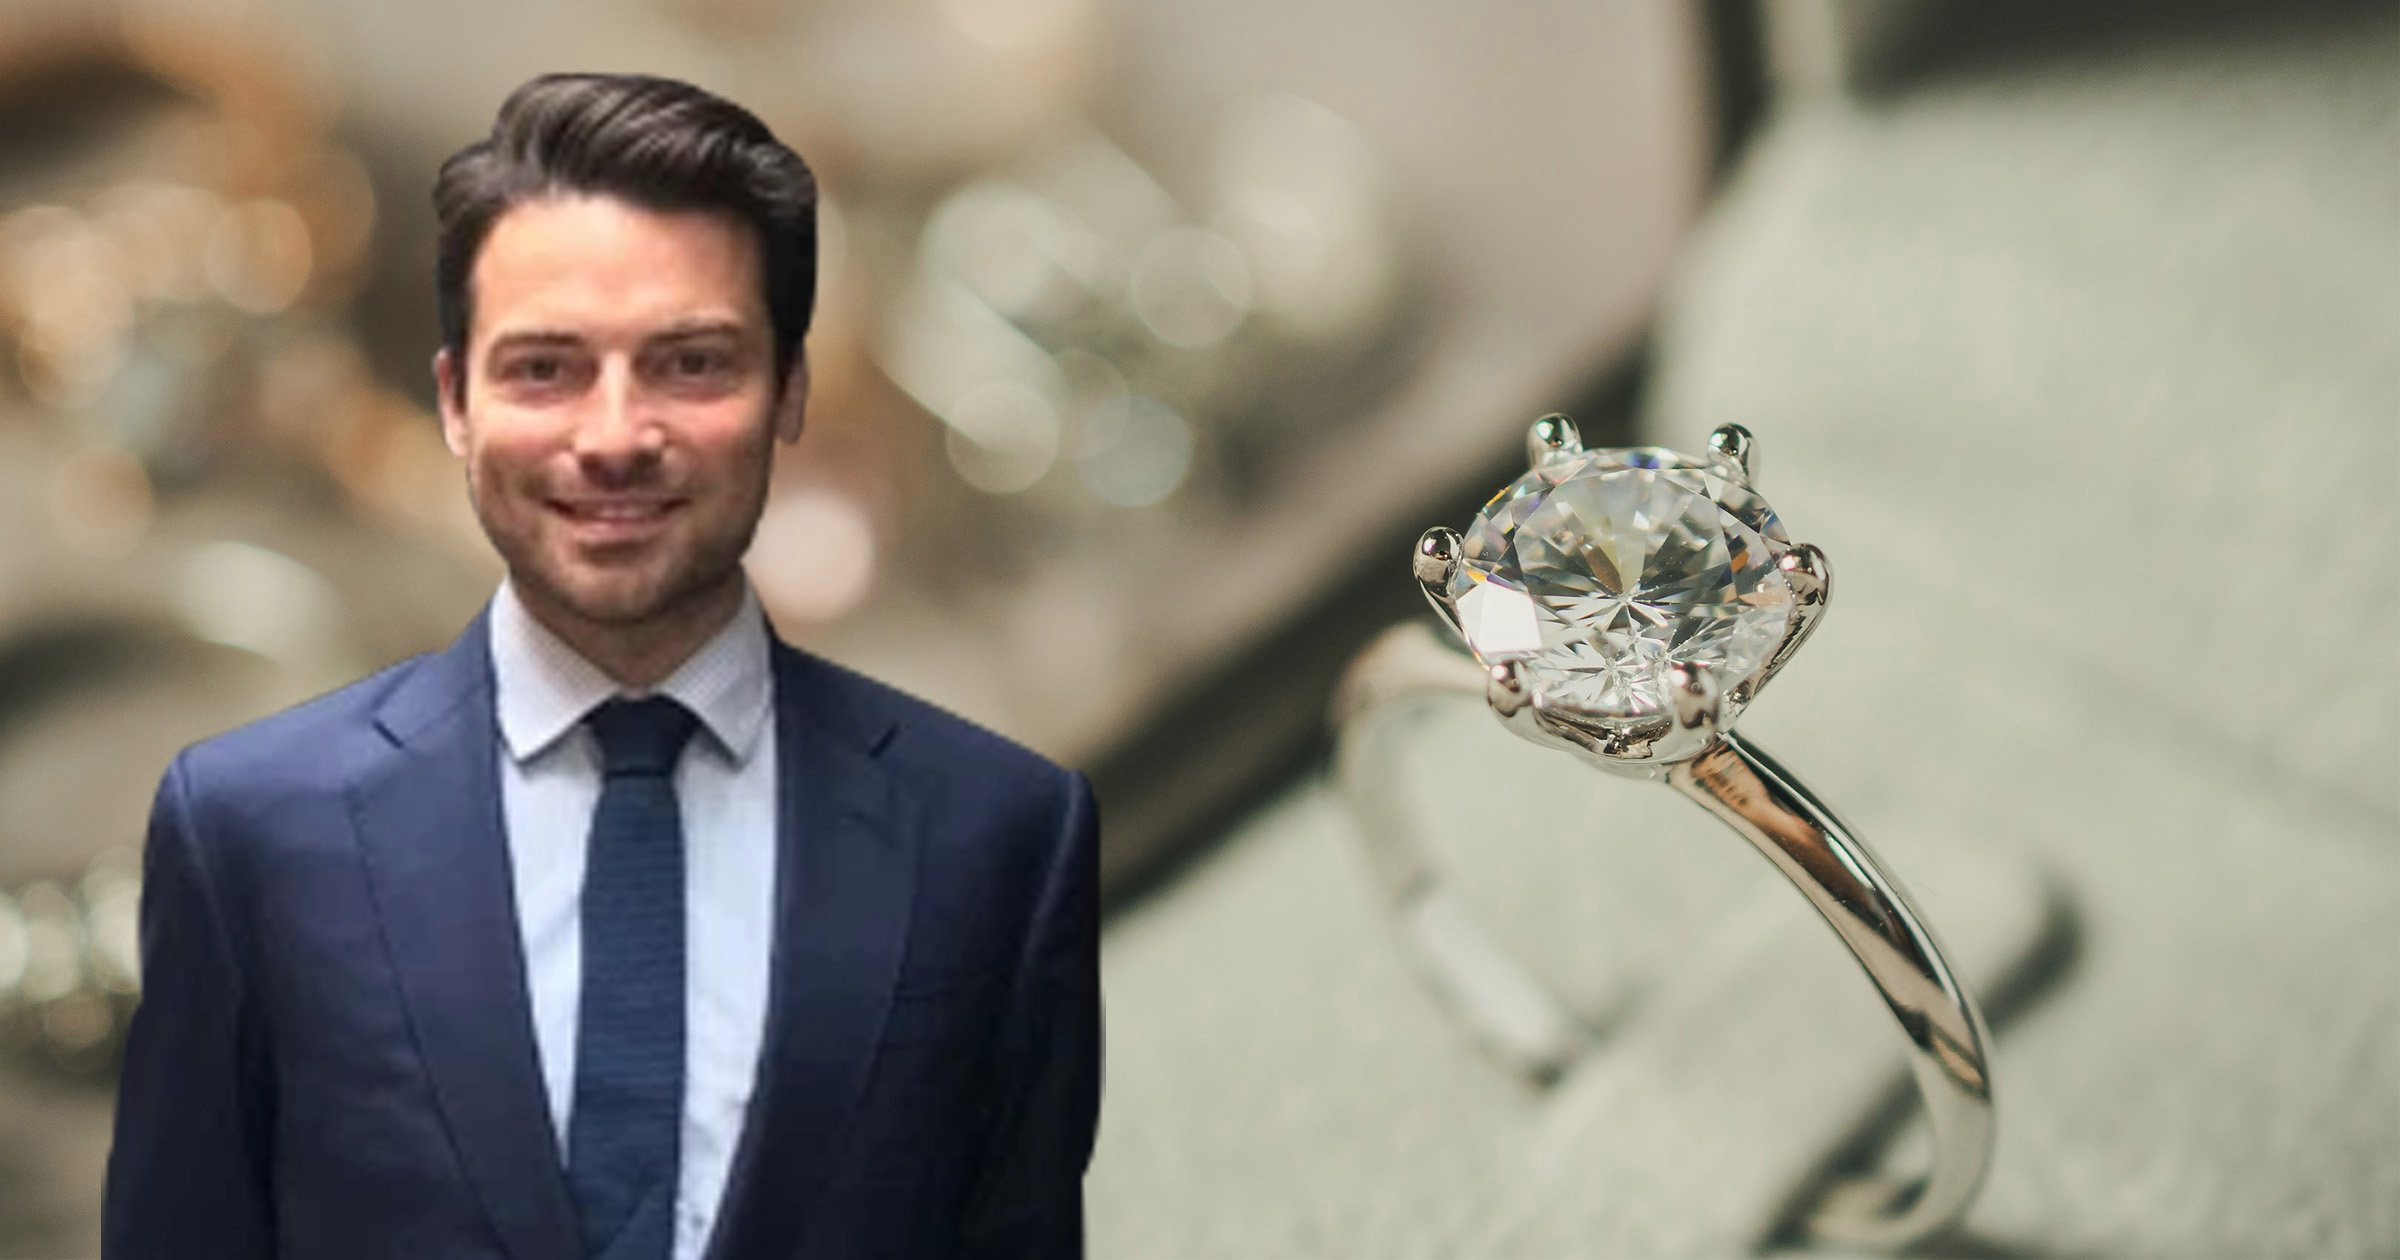 A top jeweller reveals everything you need to know about engagement rings